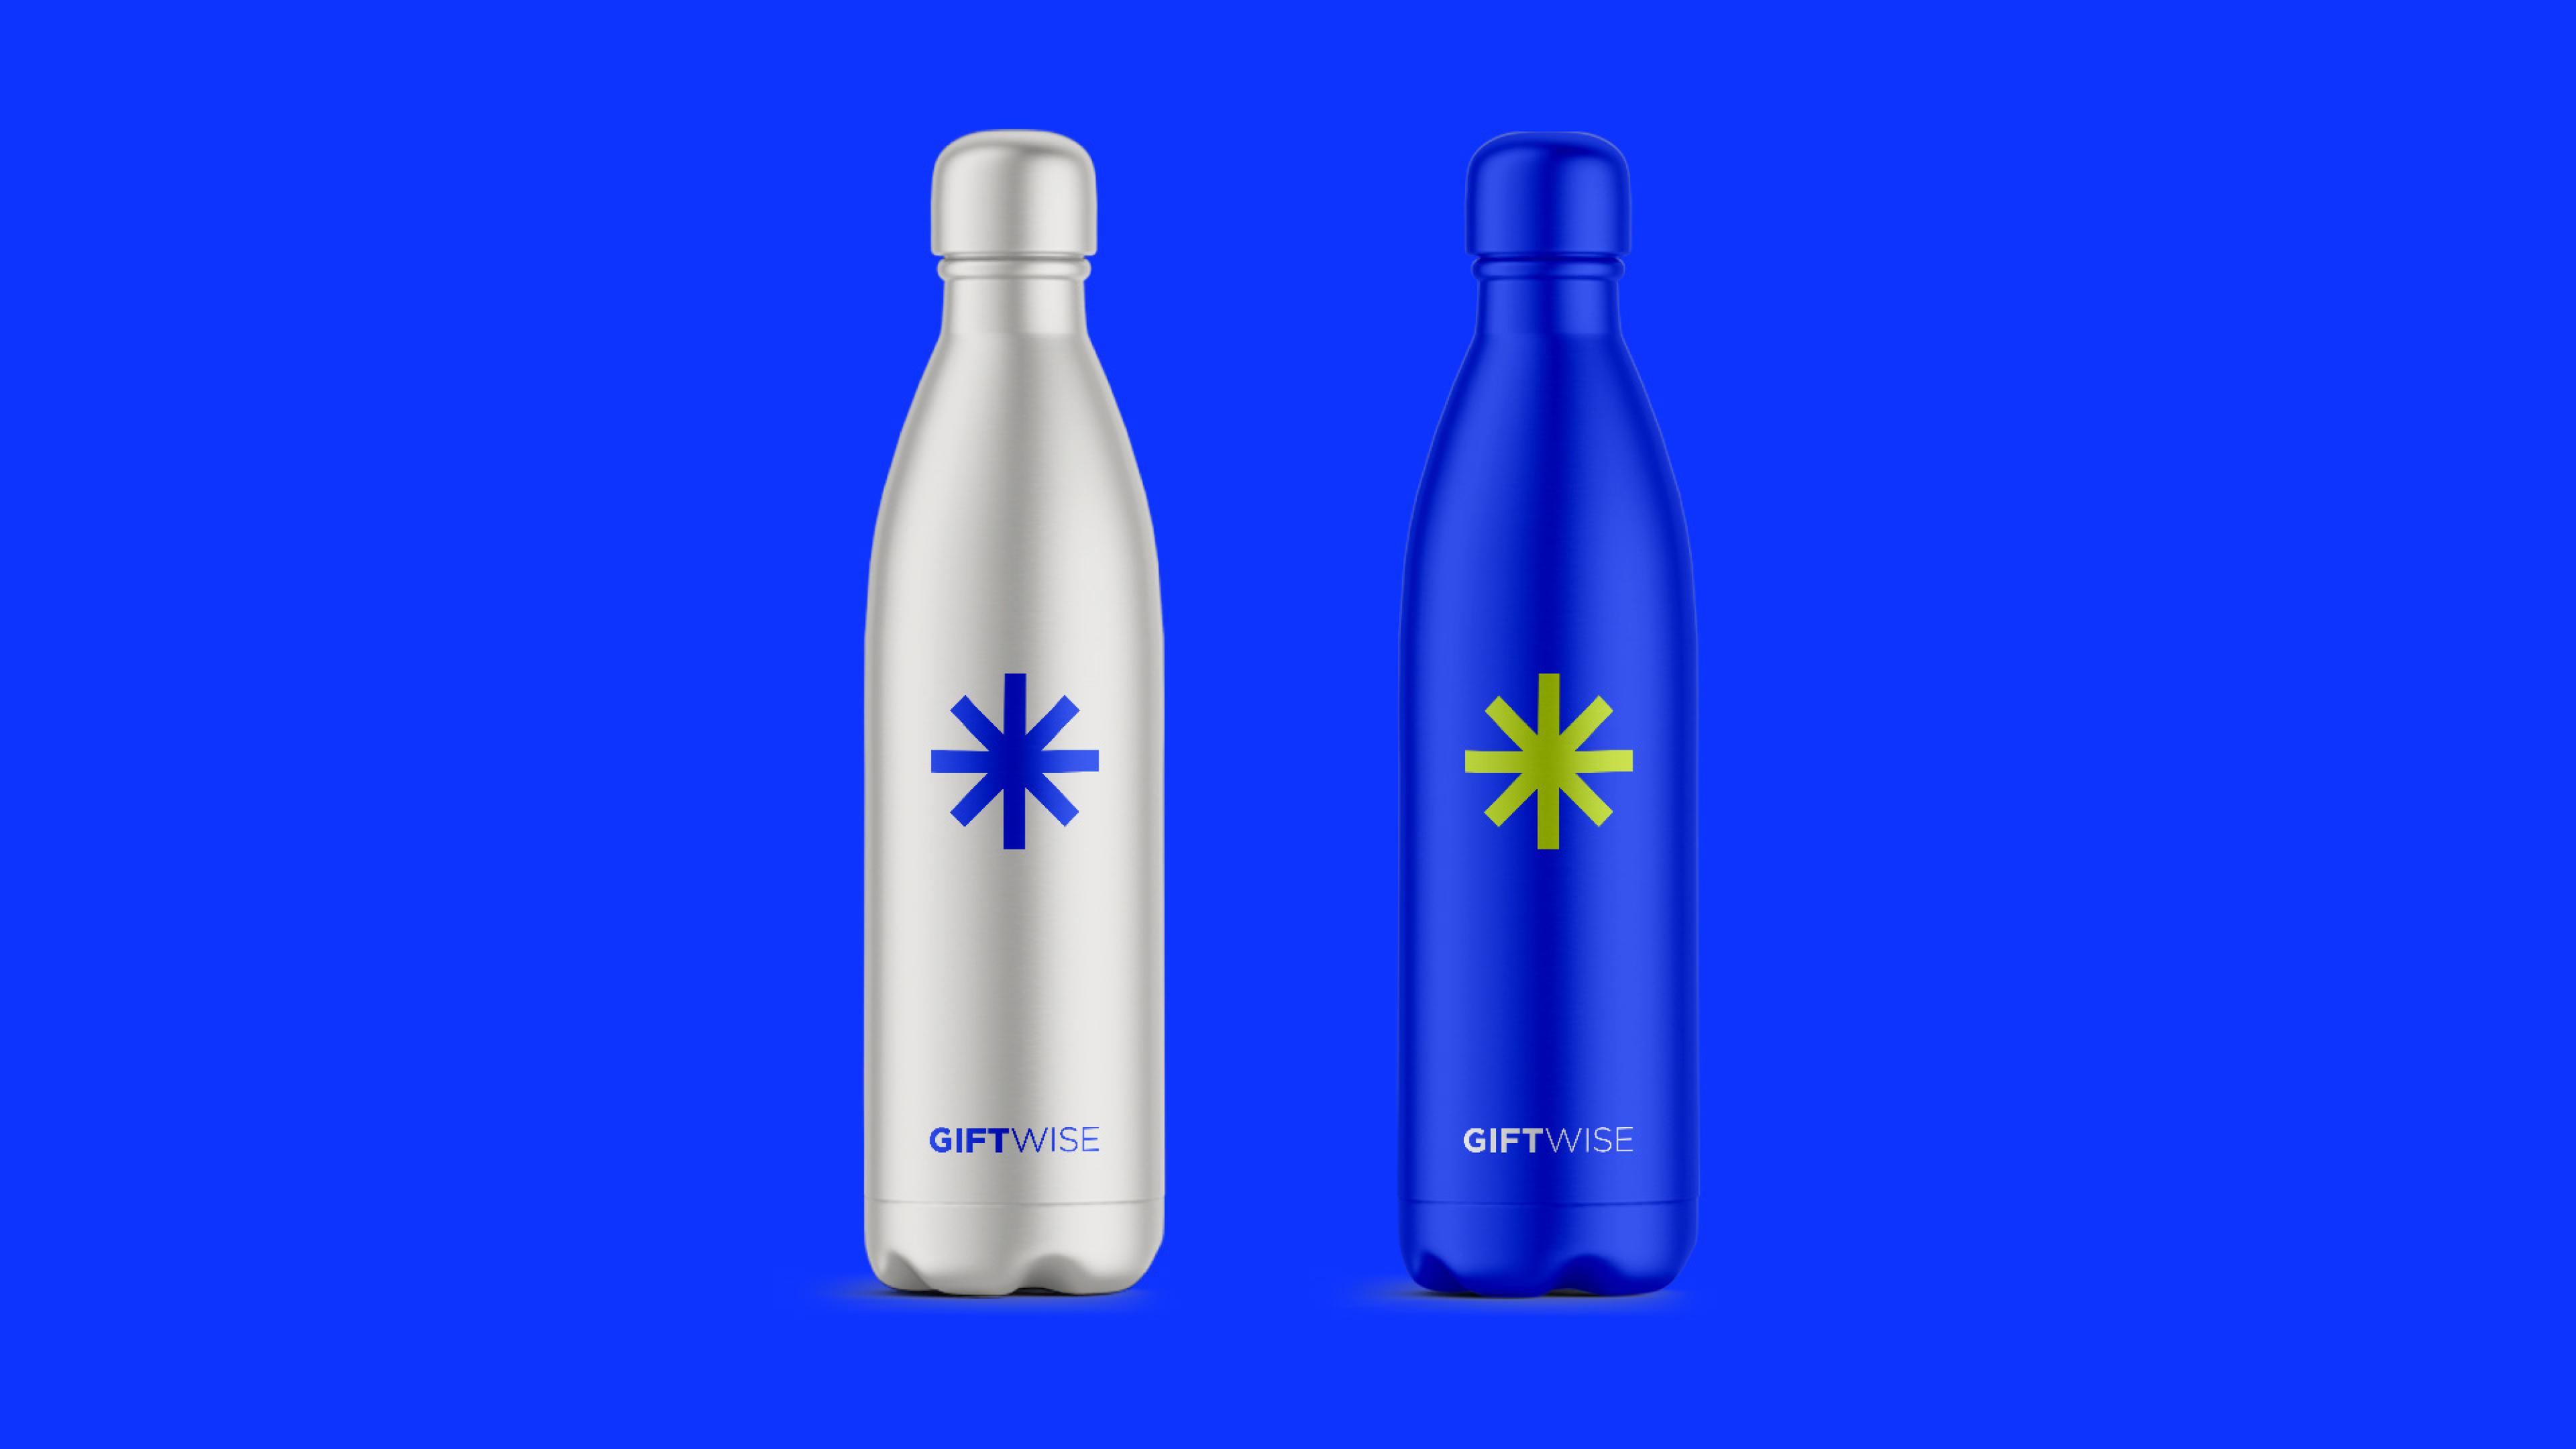 GiftBoard branding and illustrations on a blue and white metal water bottle